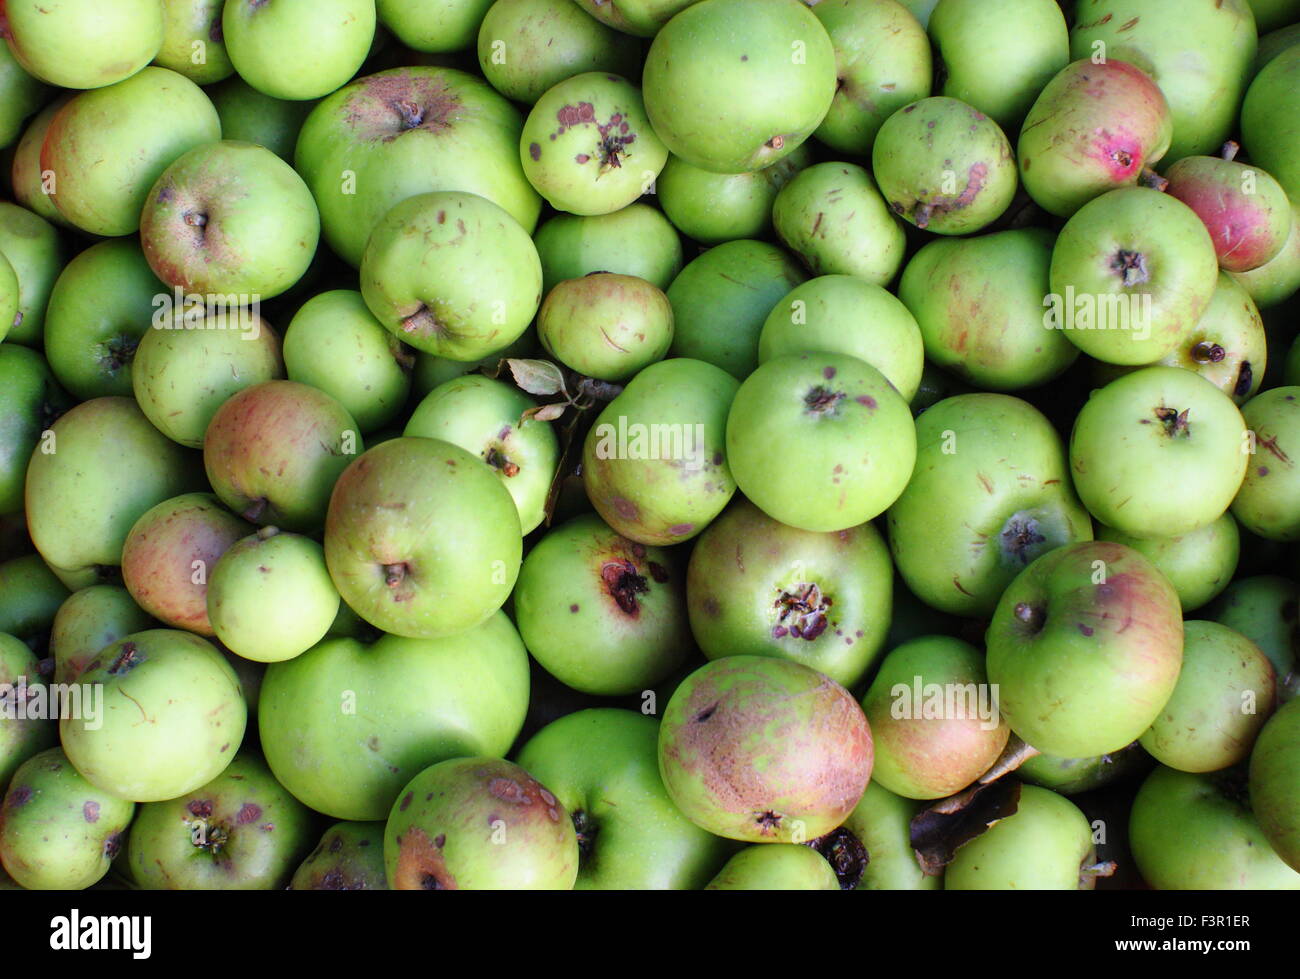 English apples, harvested from gardens are gathered for pressing at an Apple Day festival at Sheffield, Yorkshire, UK - October Stock Photo